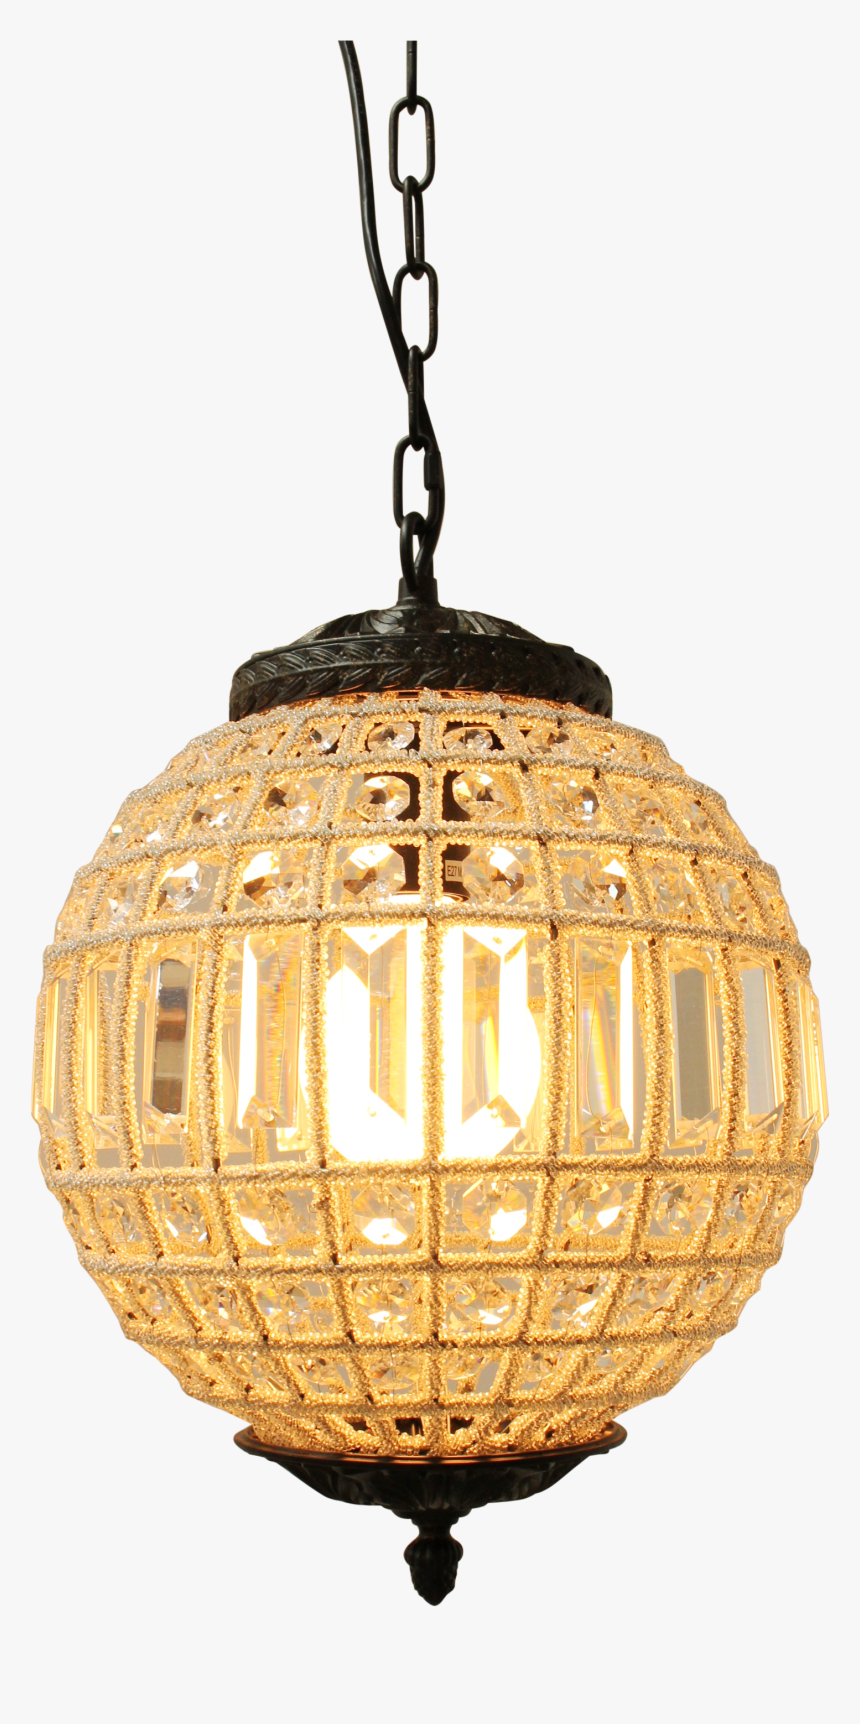 Waldorf Crystal Ball Pendant - Ceiling Fixture, HD Png Download, Free Download